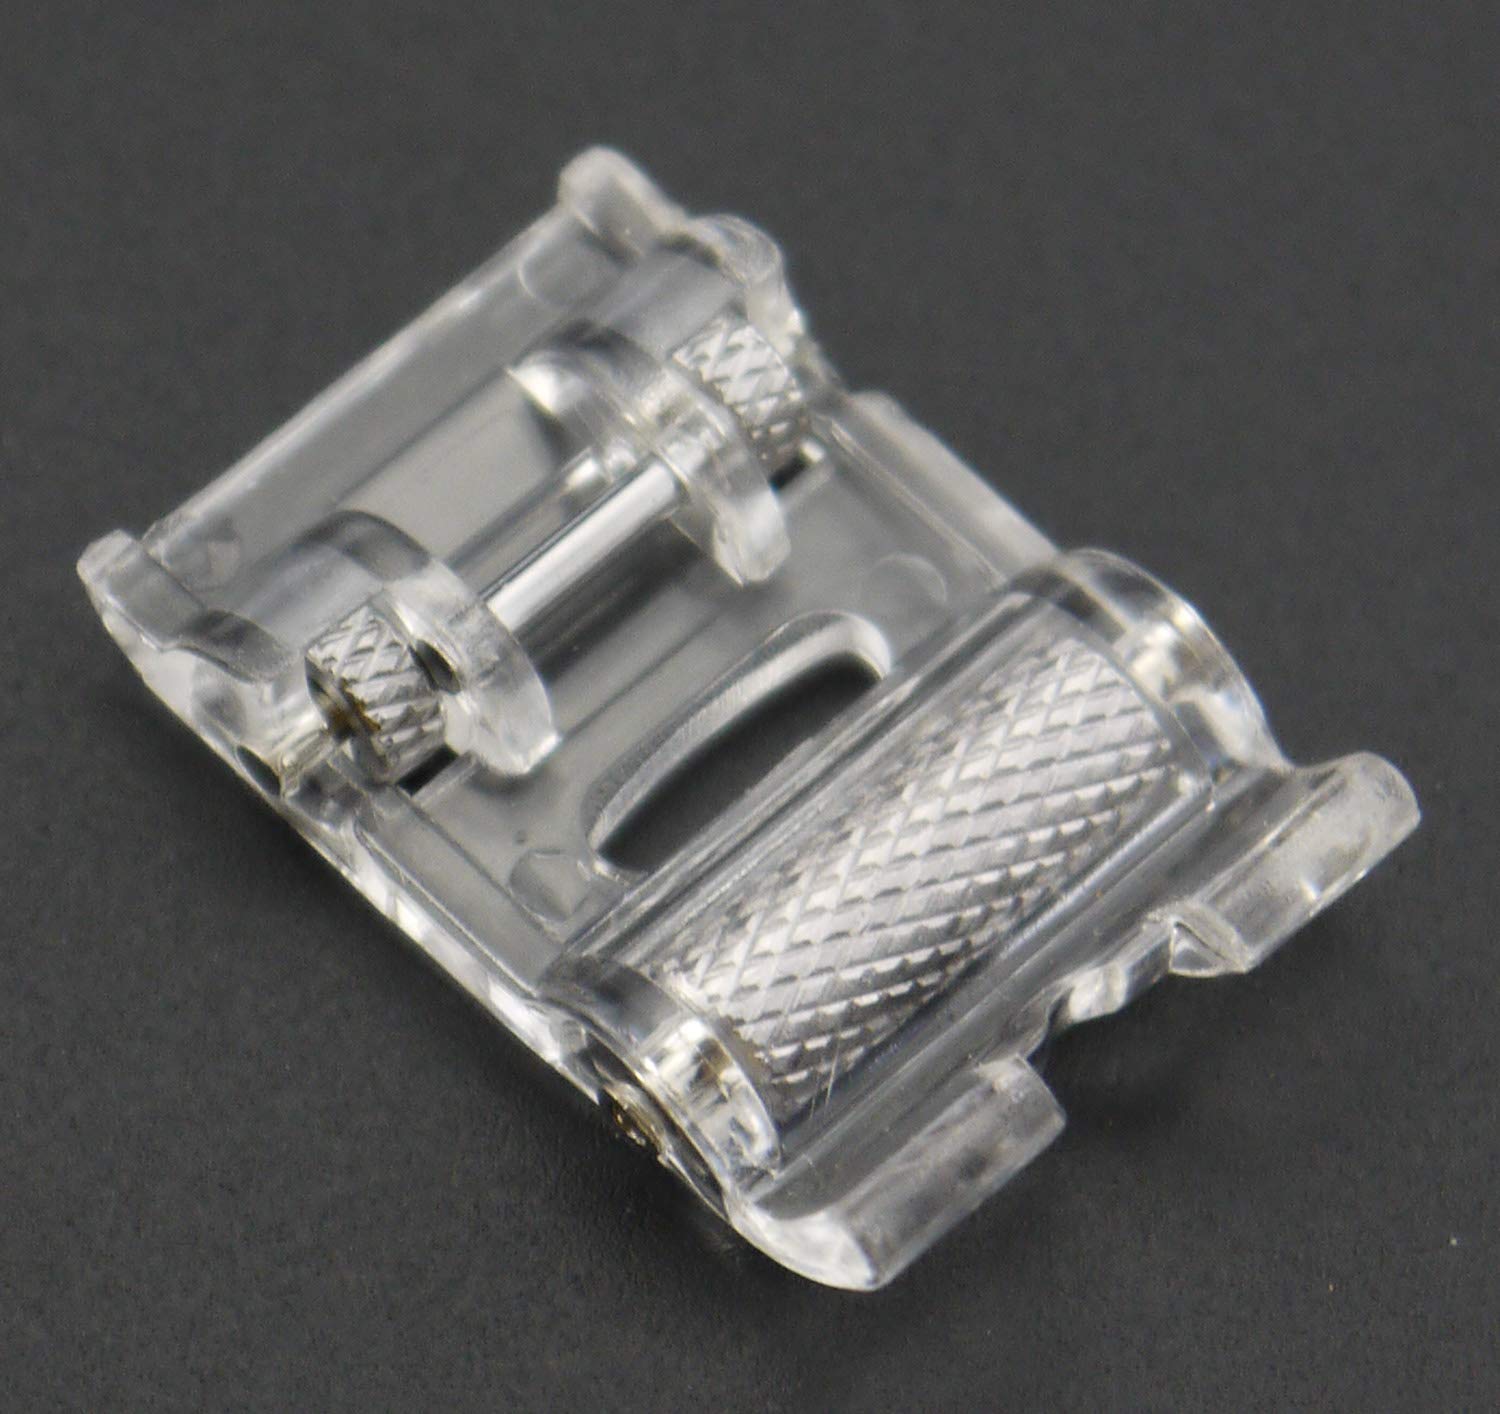 DREAMSTITCH SA190 Snap On Clear Roller Presser Foot for Brother, Babylock, Simplicity, Singer Sewing Machine Alt:ESG-RF7314W